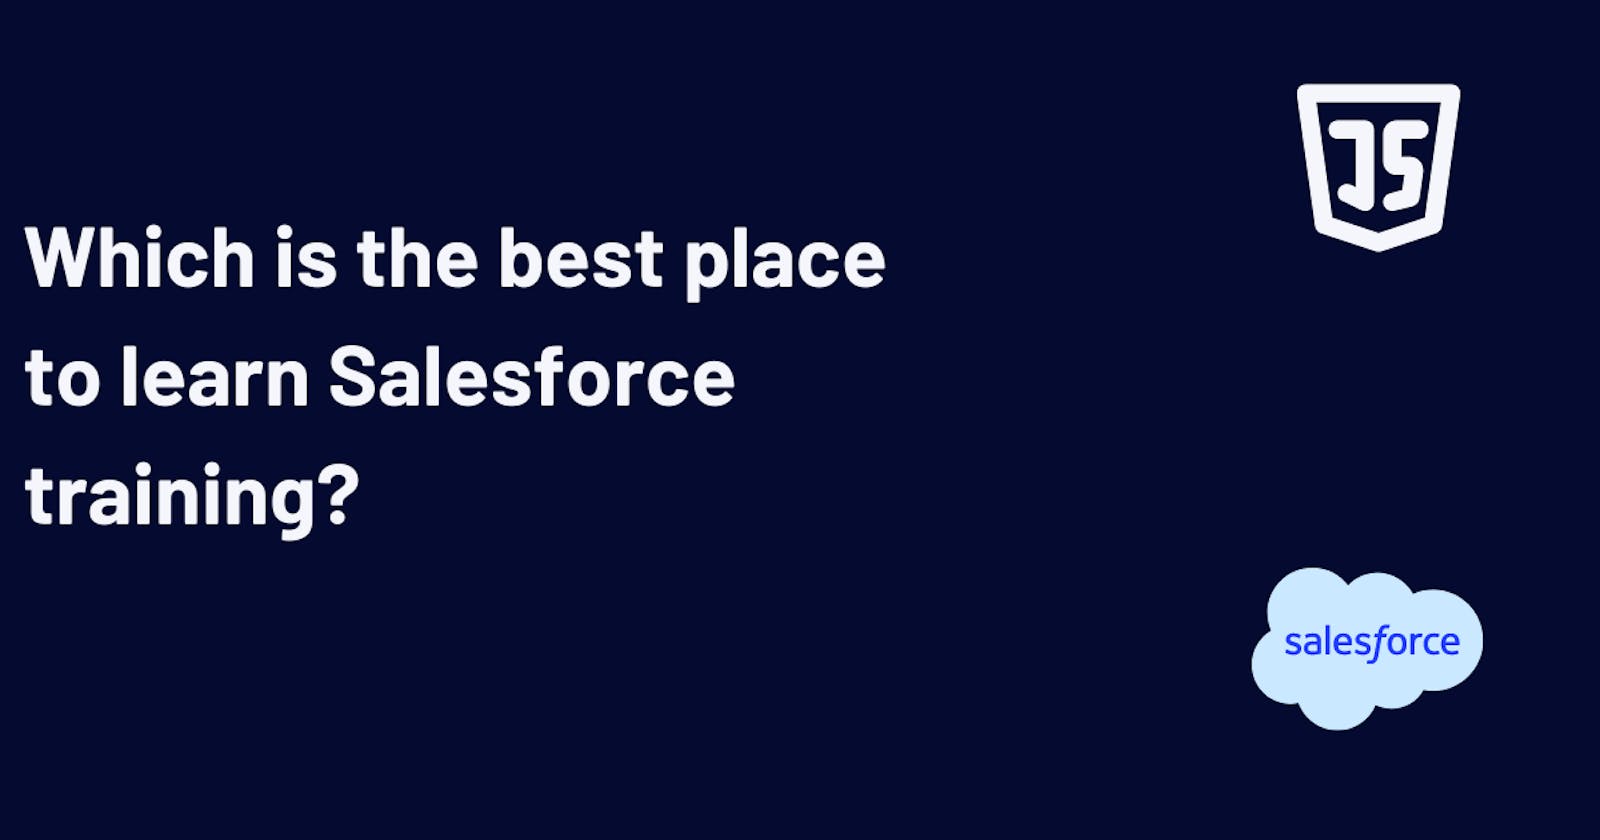 Which is the best place to learn Salesforce training?